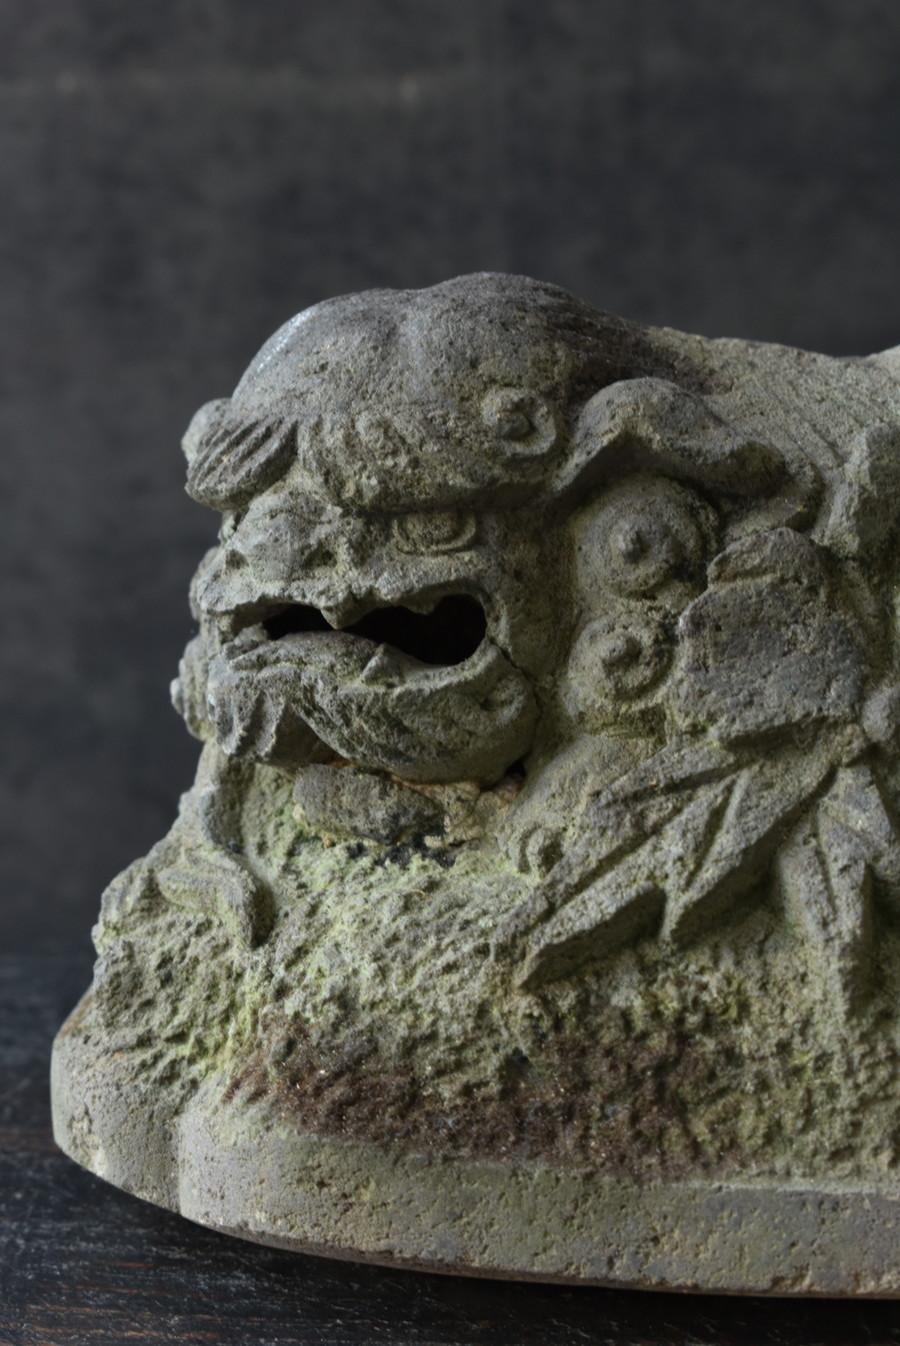 This is a stone performance lion figurine made in the late 19th century in Japan from the Edo period to the Meiji period.

Shishi has been revered as a divine beast since ancient times in Japan, and is still enshrined in temples as a very popular